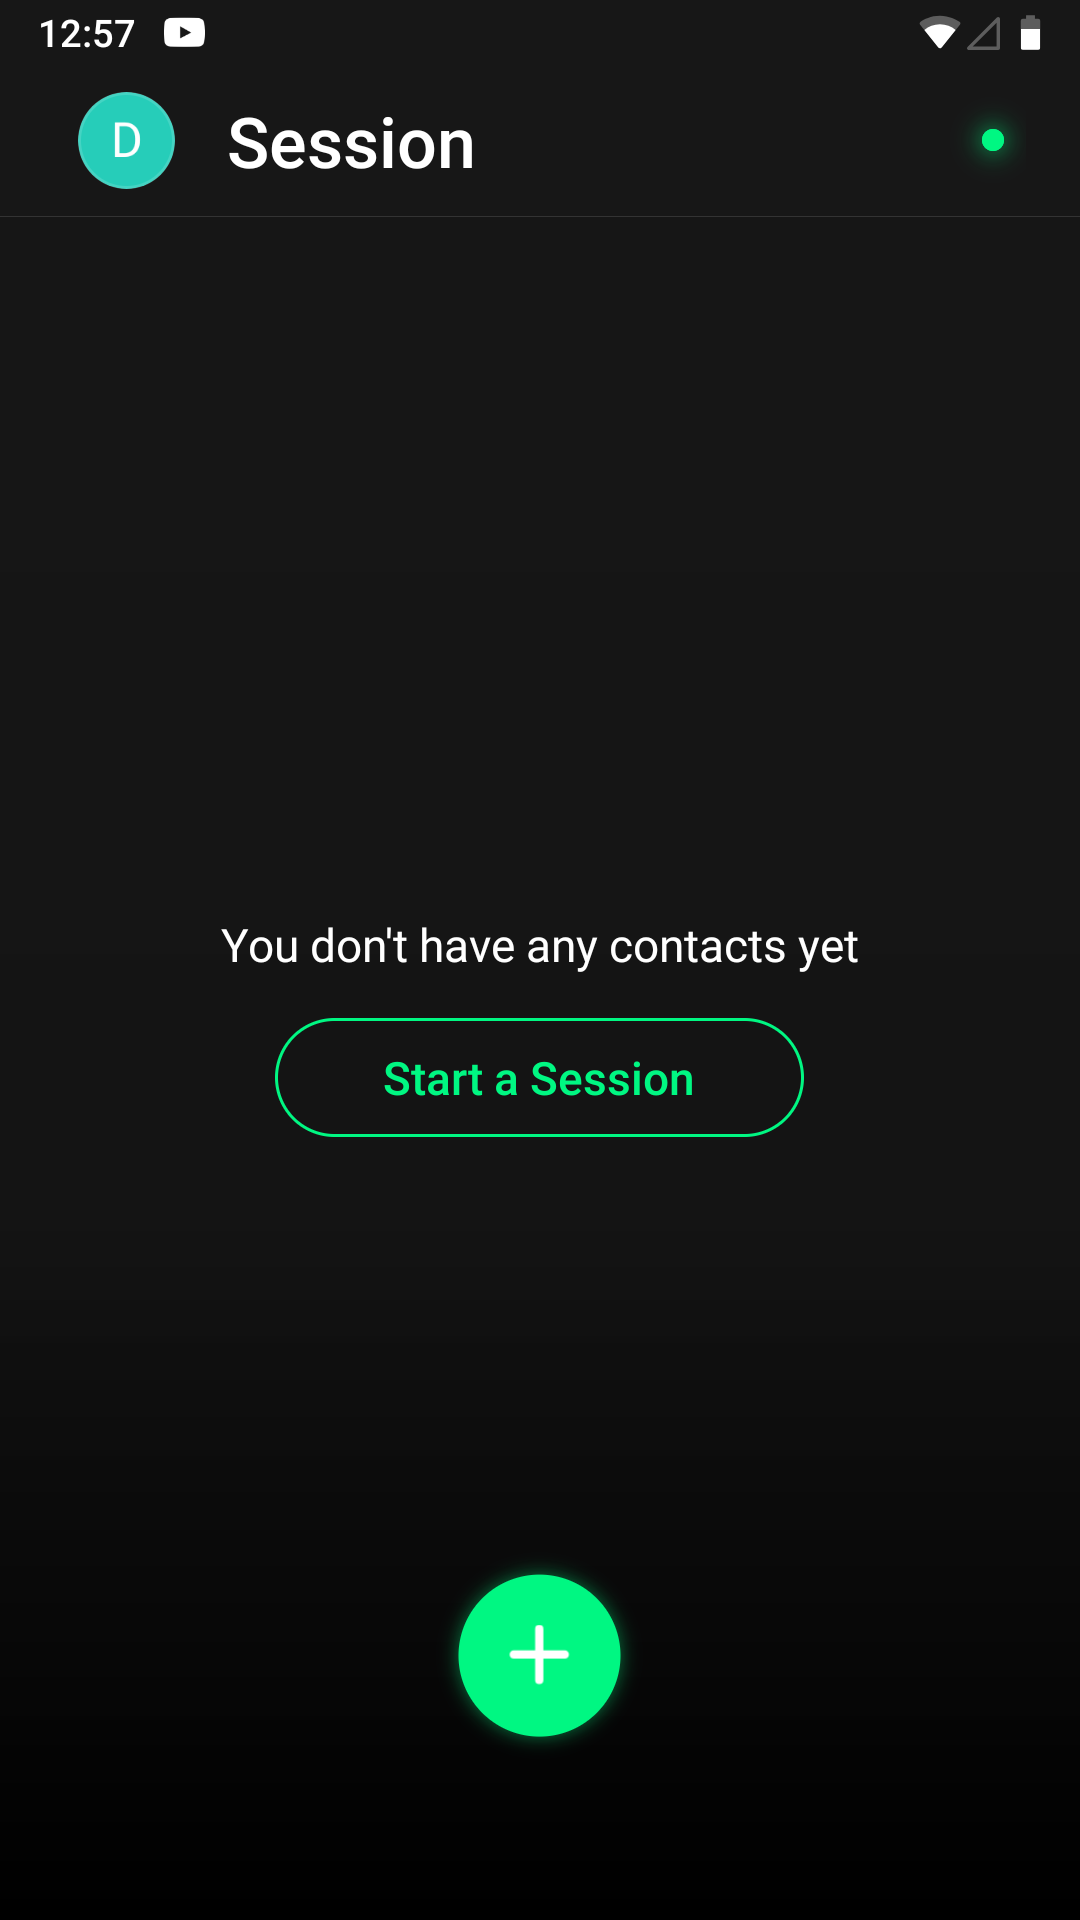 Session's chat screen